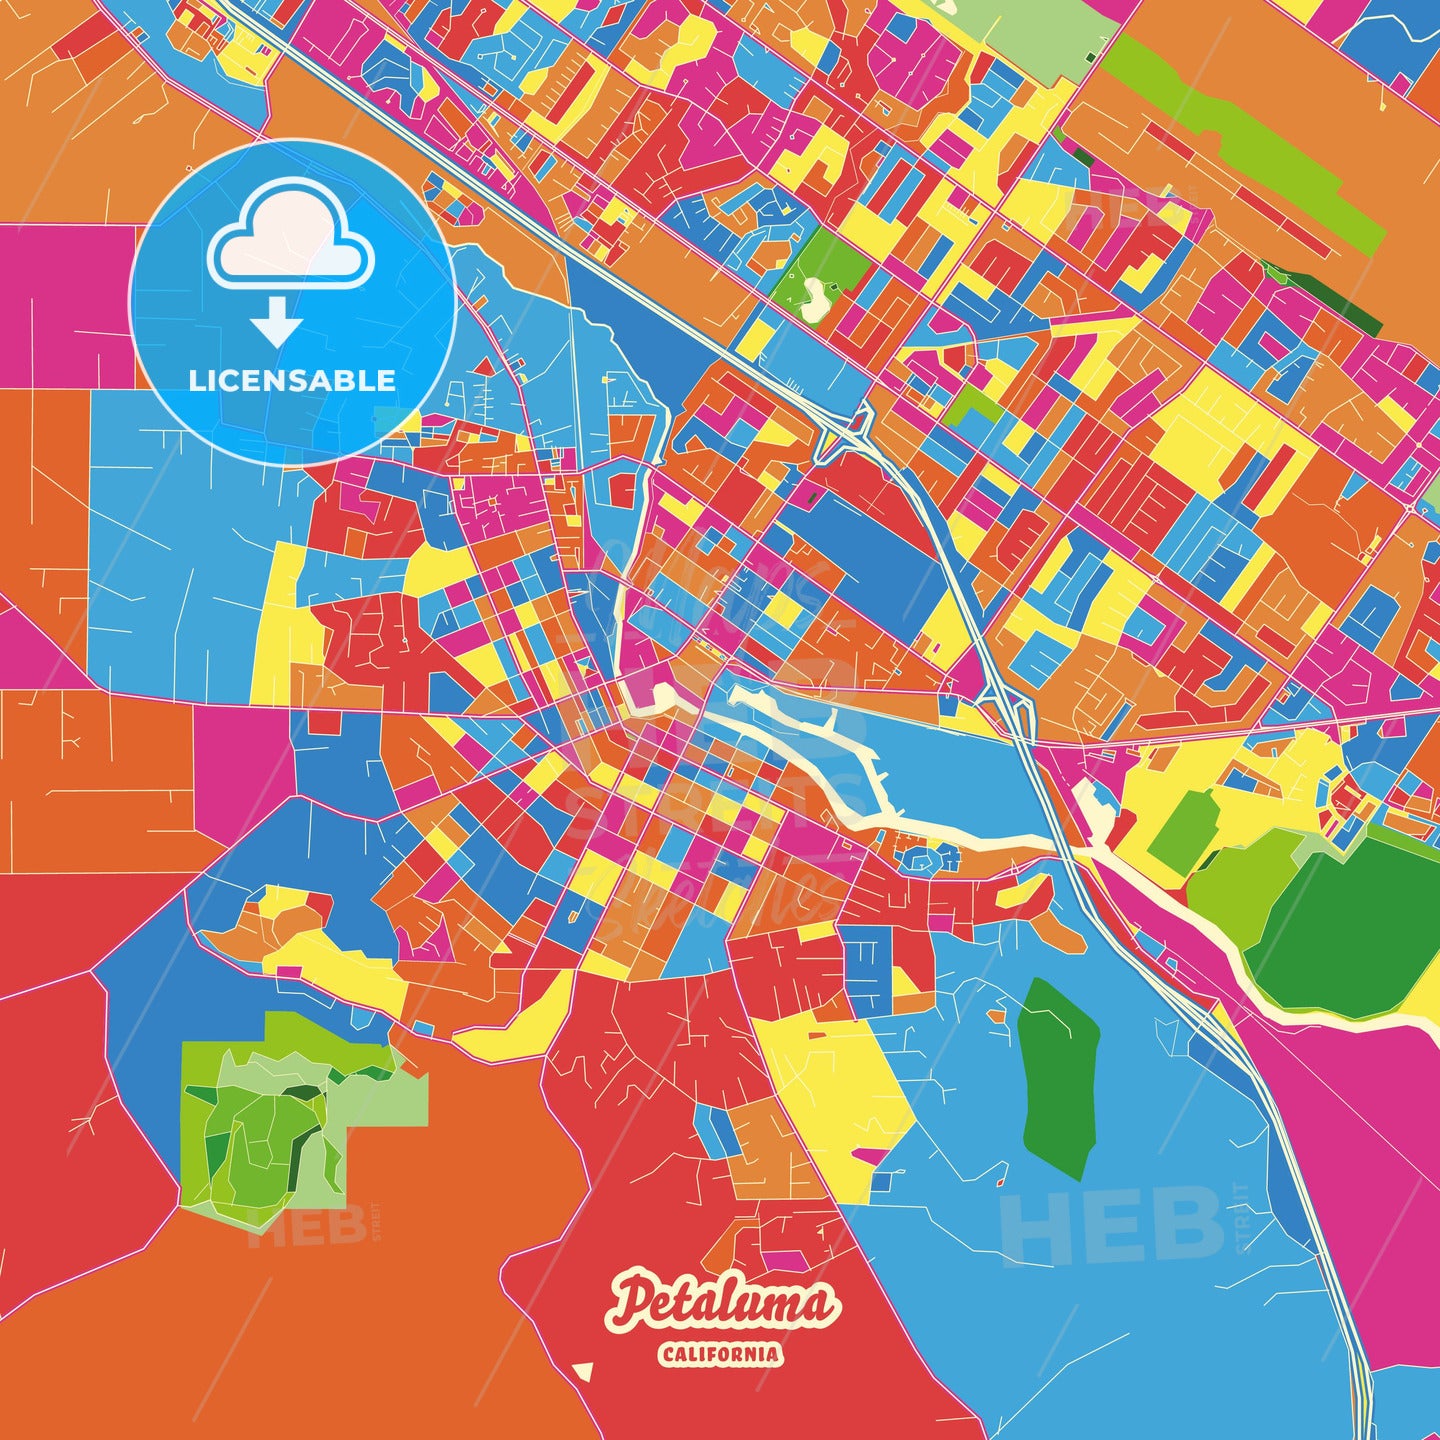 Petaluma, United States Crazy Colorful Street Map Poster Template - HEBSTREITS Sketches